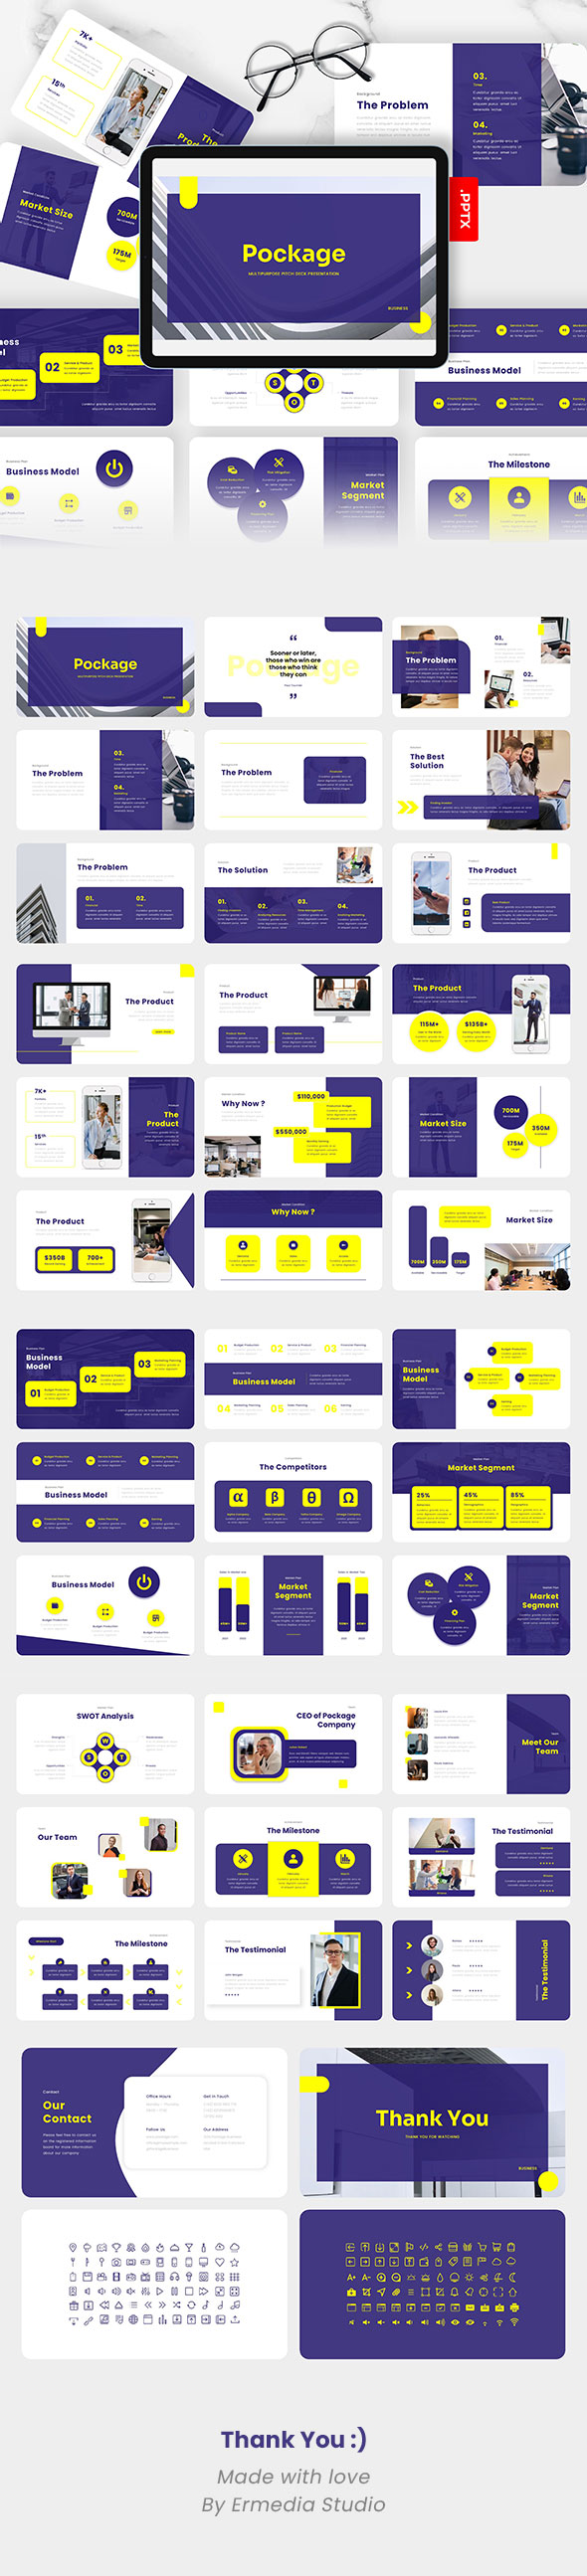 Pockage - Multipurpose Pitch Deck PowerPoint Template